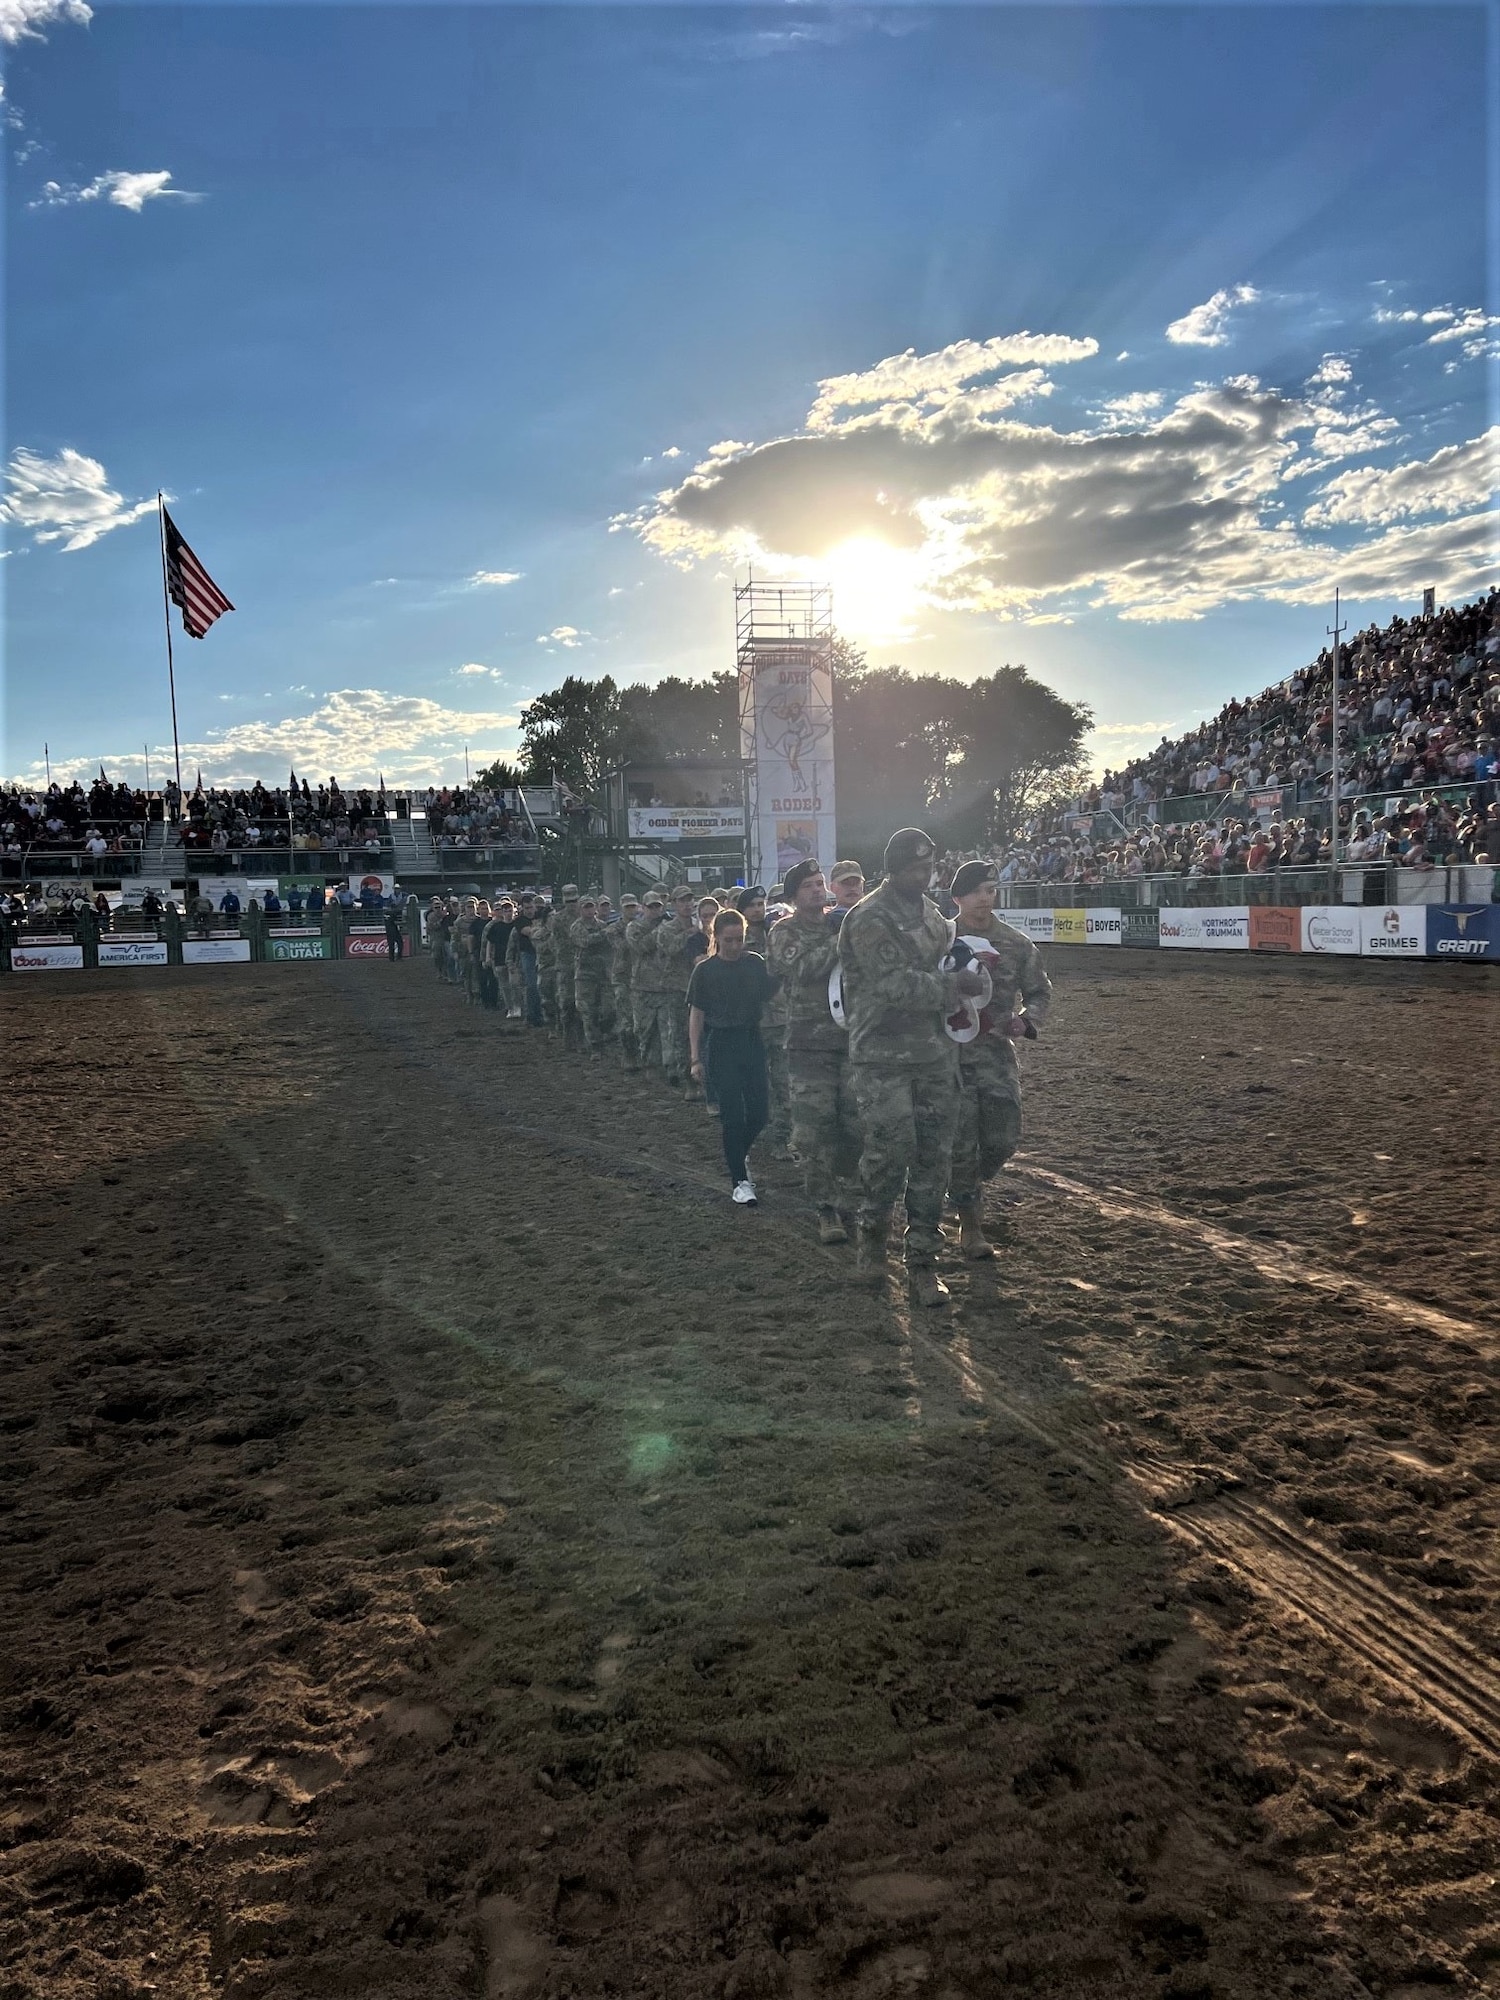 Patriots from Hill AFB joined other Utah service members and celebrated Patriot Night at the Ogden Pioneer Days Rodeo opening ceremony July 22, 2022, by transporting “The Major,” a giant American flag in Ogden, Utah